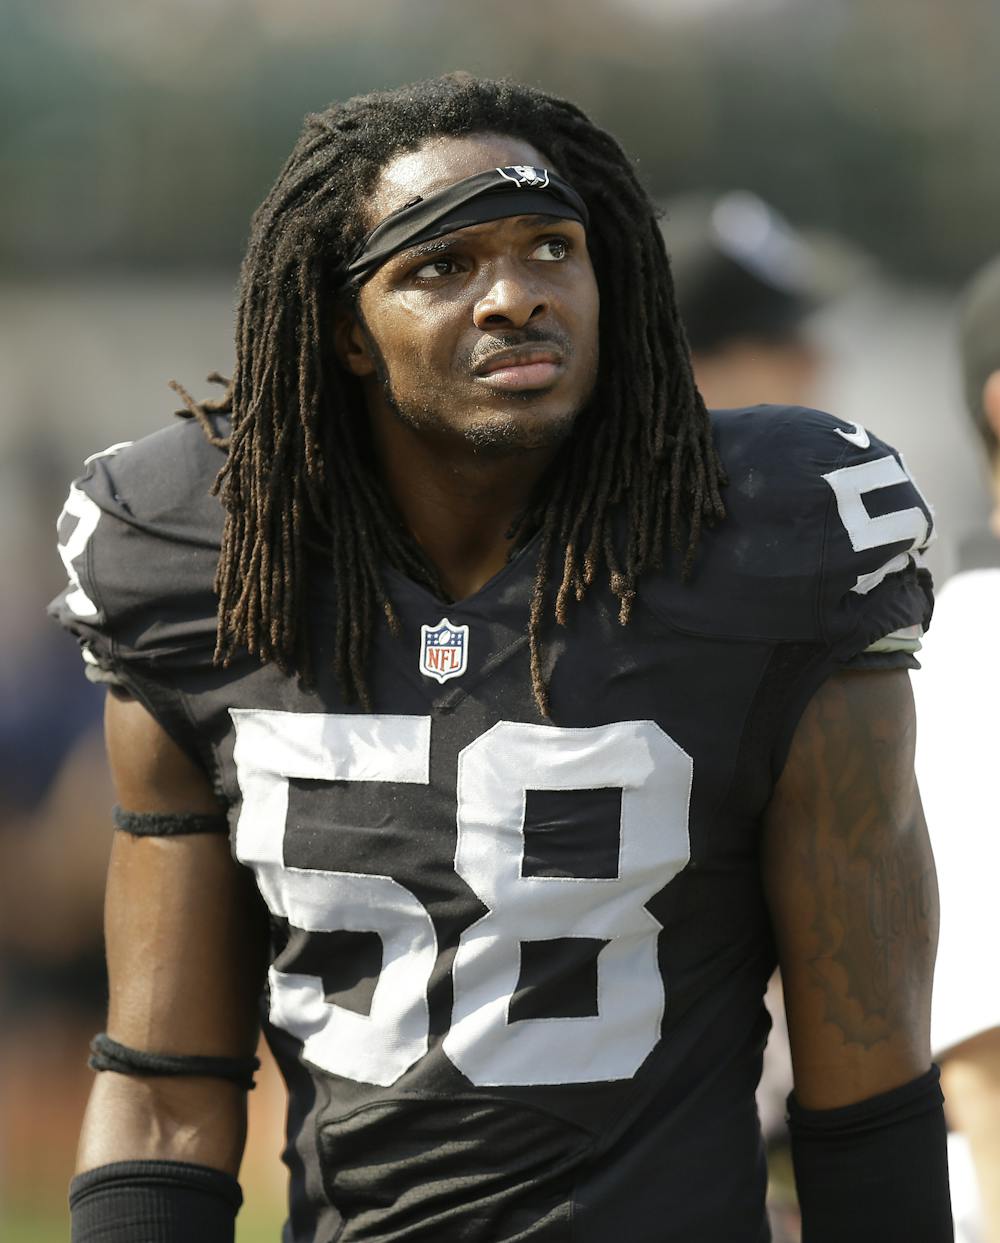 <p>In this Sunday, Sept. 13, 2015 photo, Oakland Raiders outside linebacker Neiron Ball (58) stands on the sideline during the second half of an NFL football game against the Cincinnati Bengals in Oakland, Calif. Former Oakland Raiders linebacker Neiron Ball, who played college football at Florida after recovering from brain surgery, has died. He was 27.(AP Photo/Ben Margot)</p>